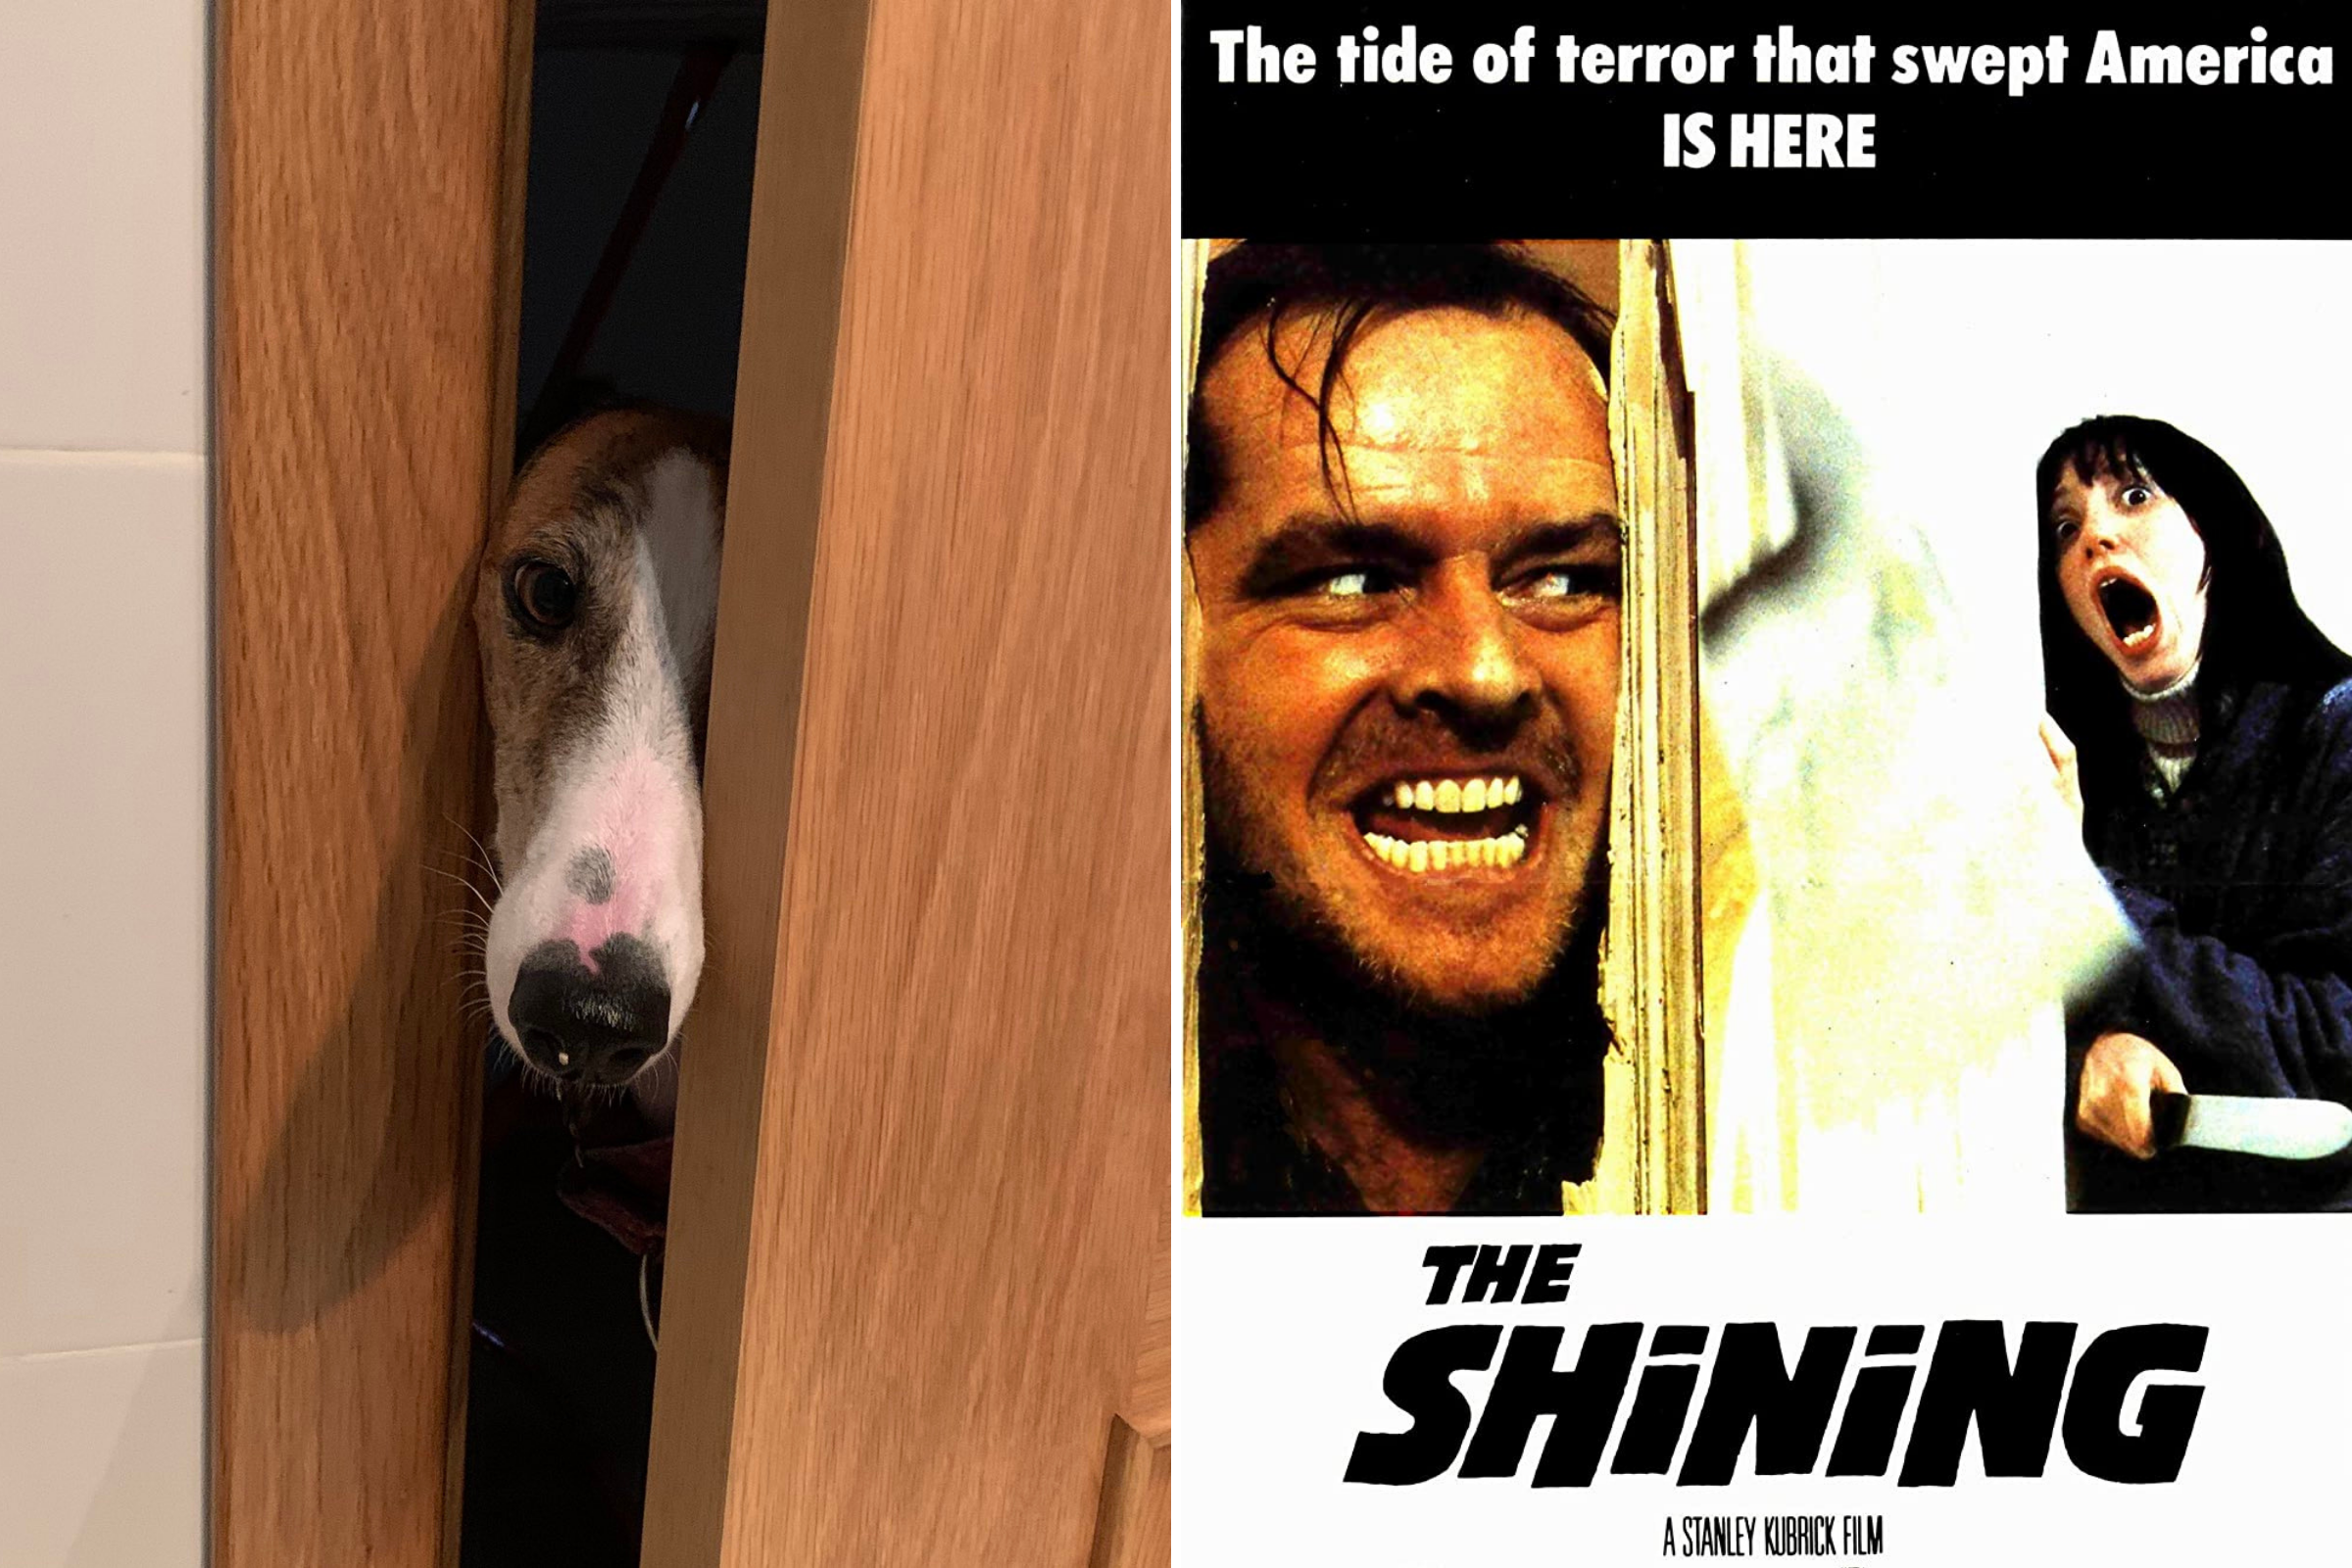 Dog Unintentionally Recreating Famous Movie Scenes Hailed a 'Star' Online